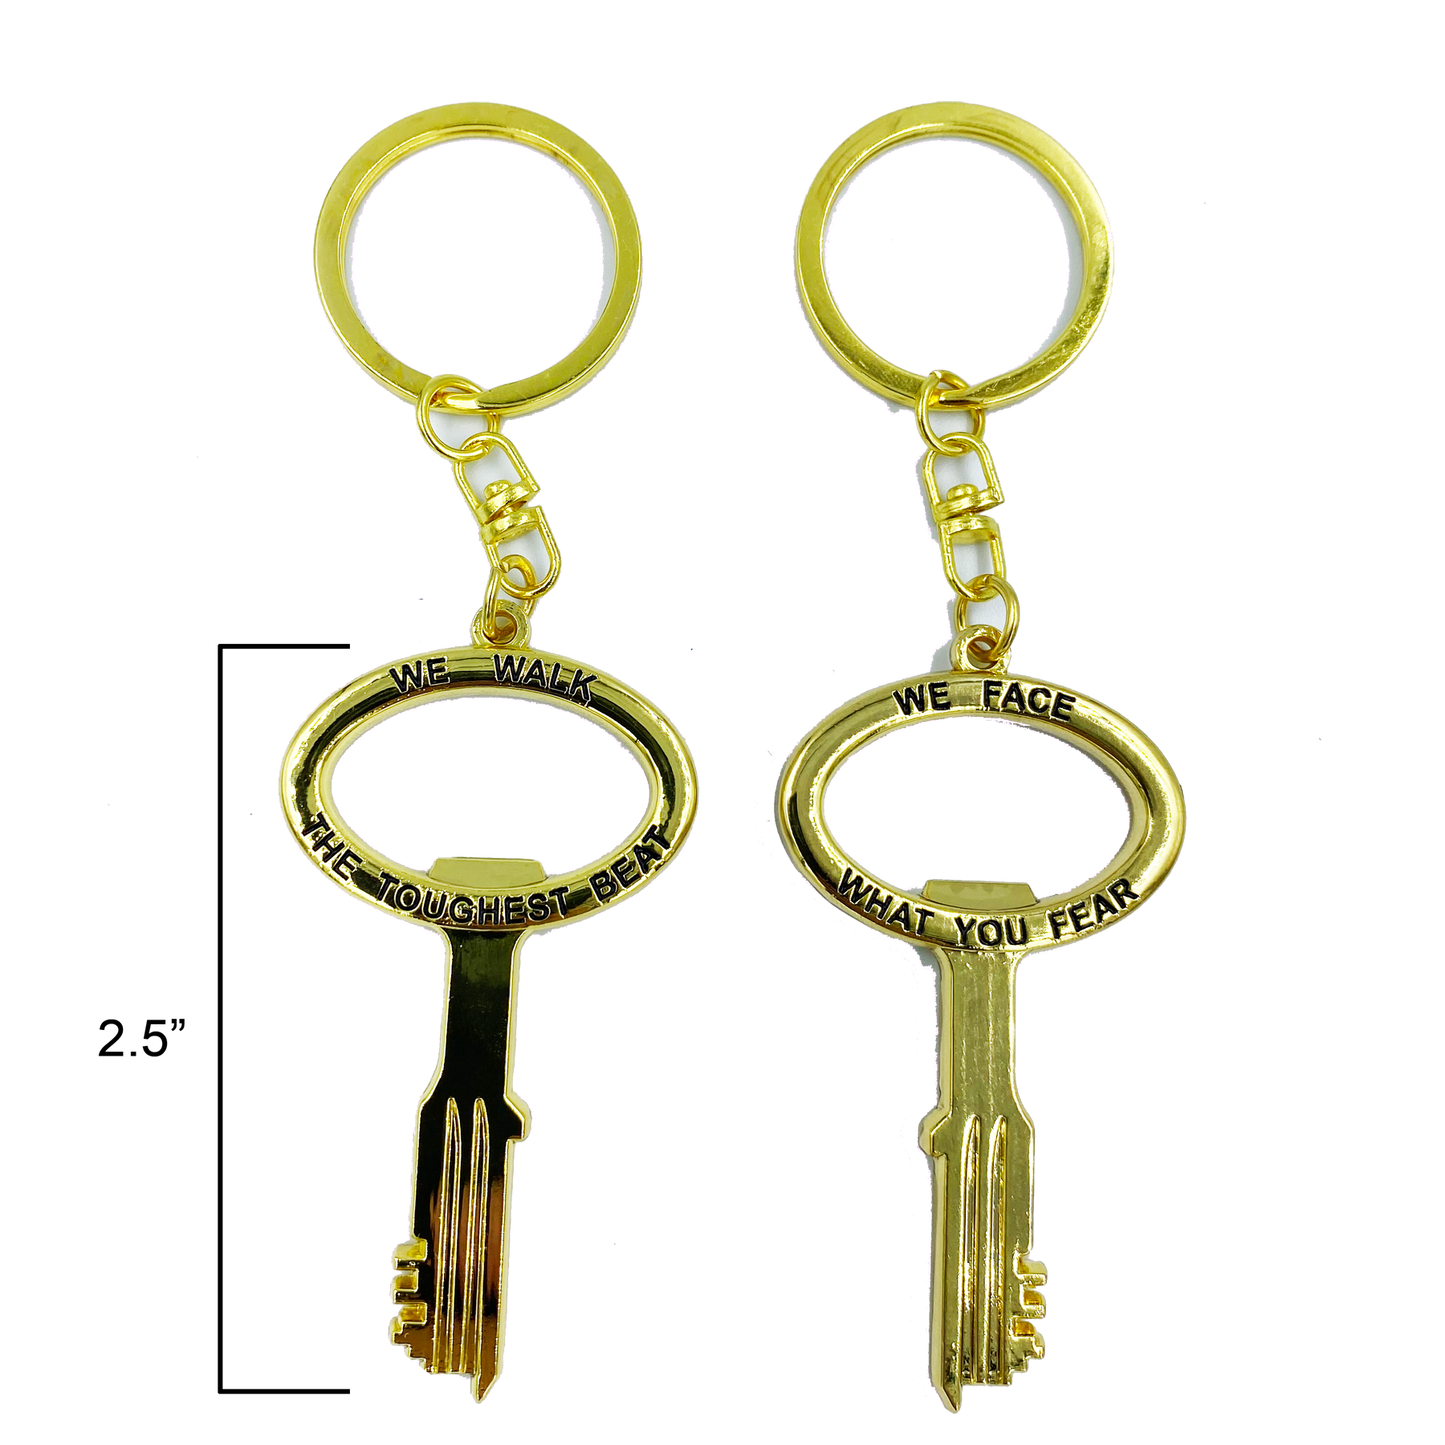 GG-021 Gold Prison Jail Key bottle opener keychain challenge coin Correctional Officer CO Corrections thin gray line